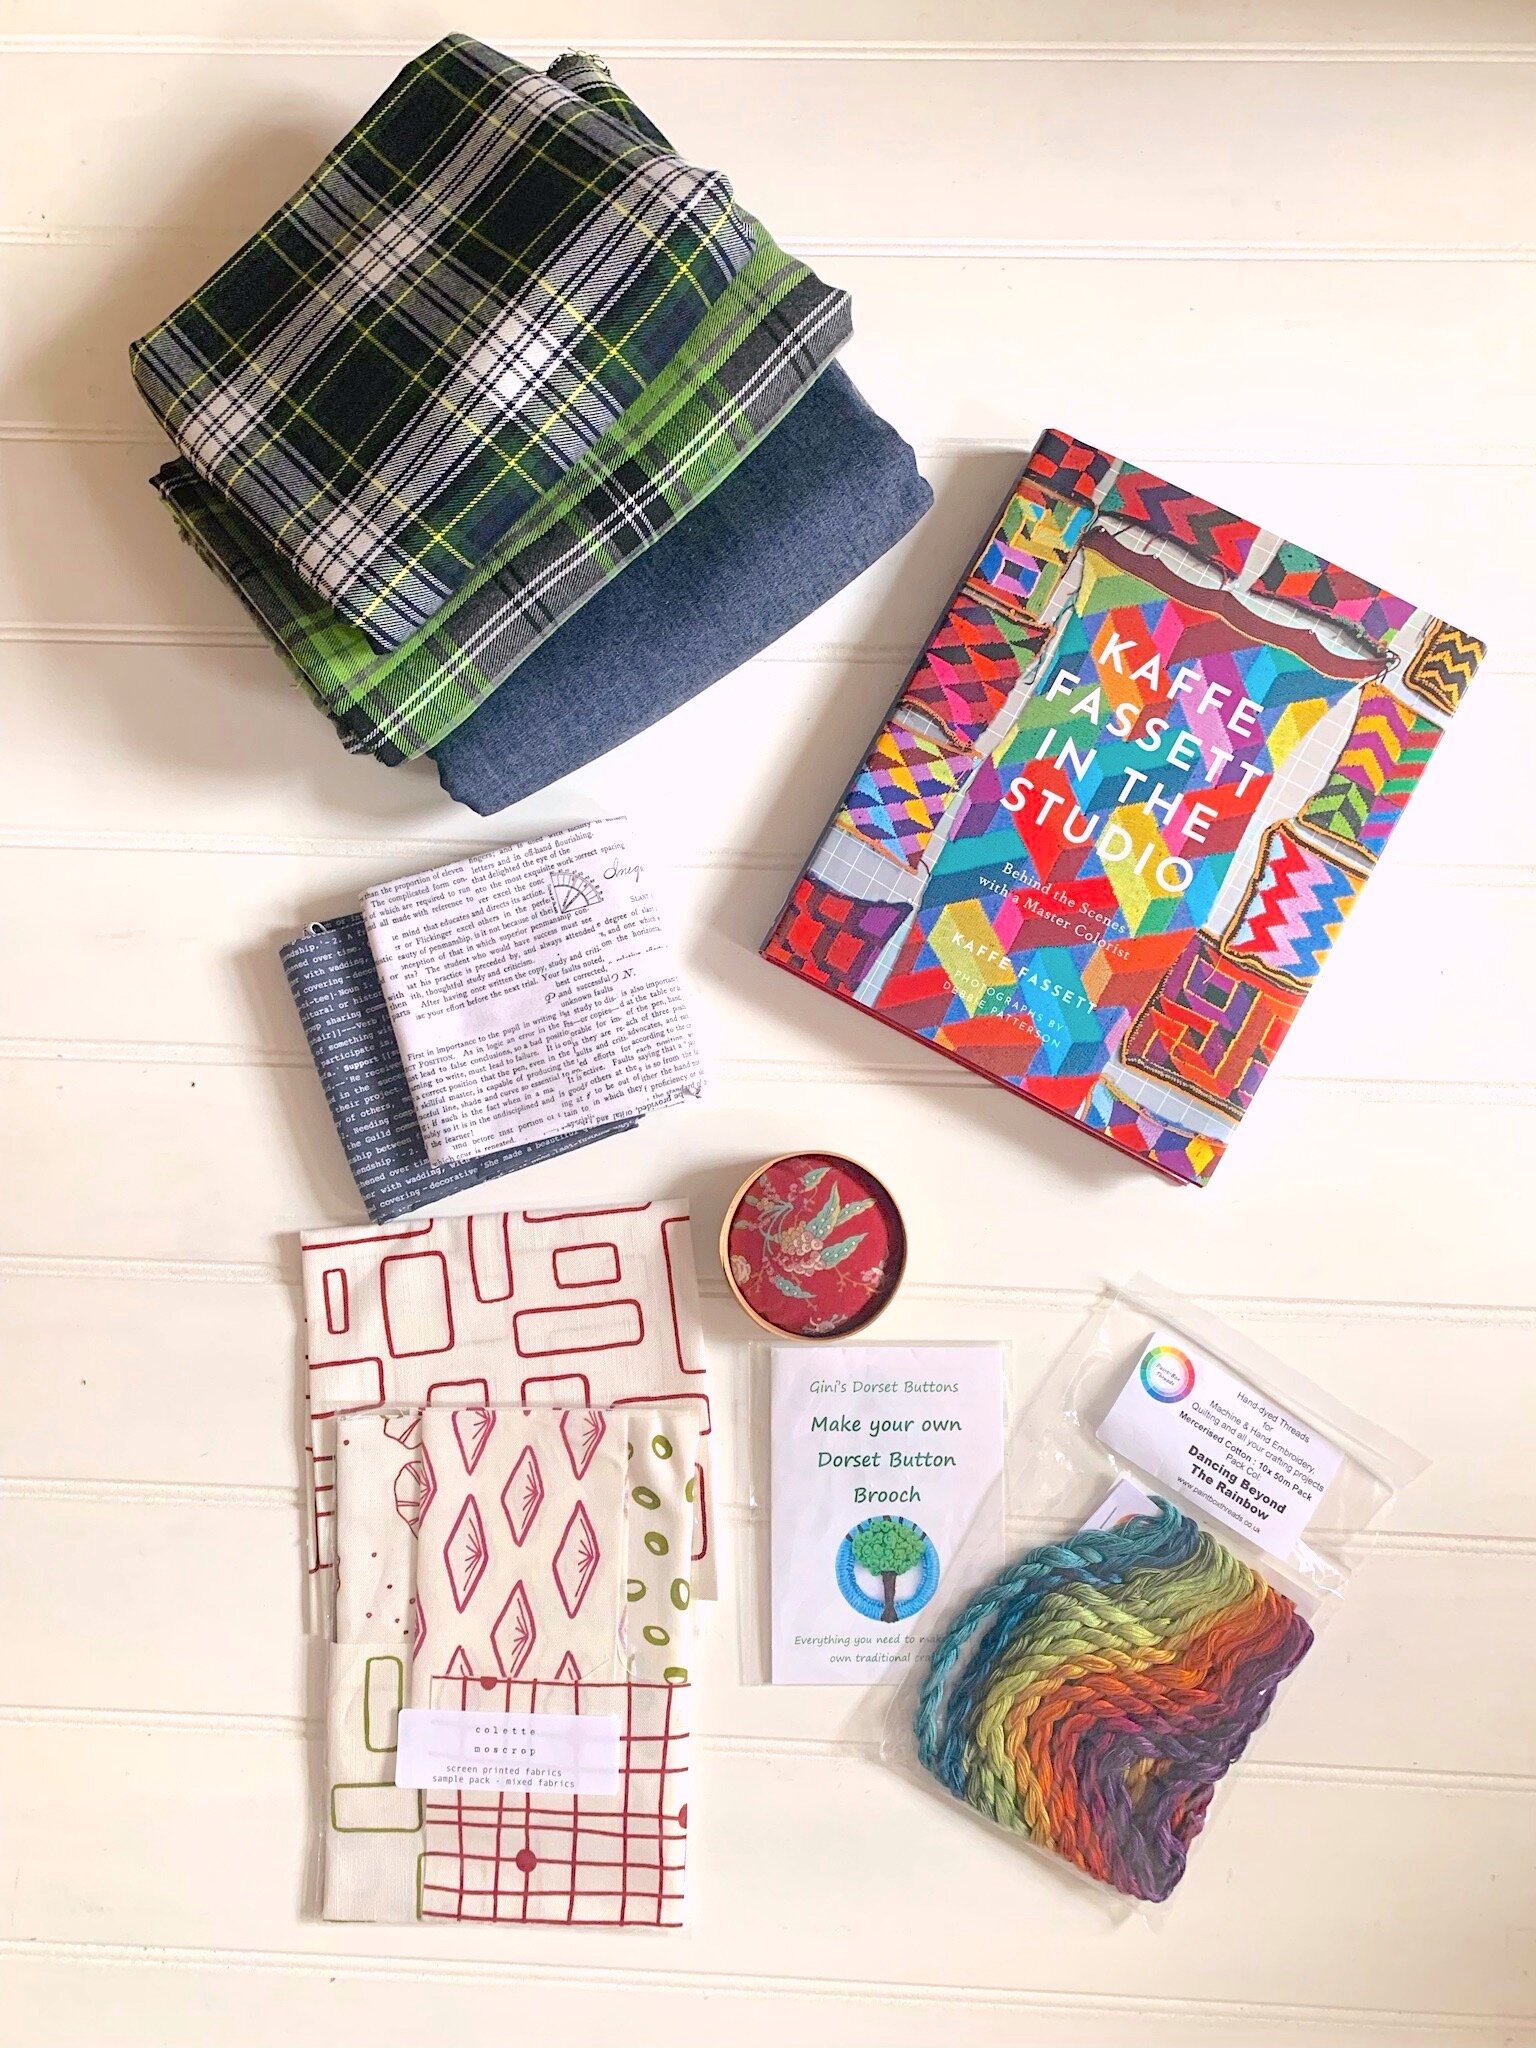 Vintage Sewing Pattern Haul - Pitching Stitches